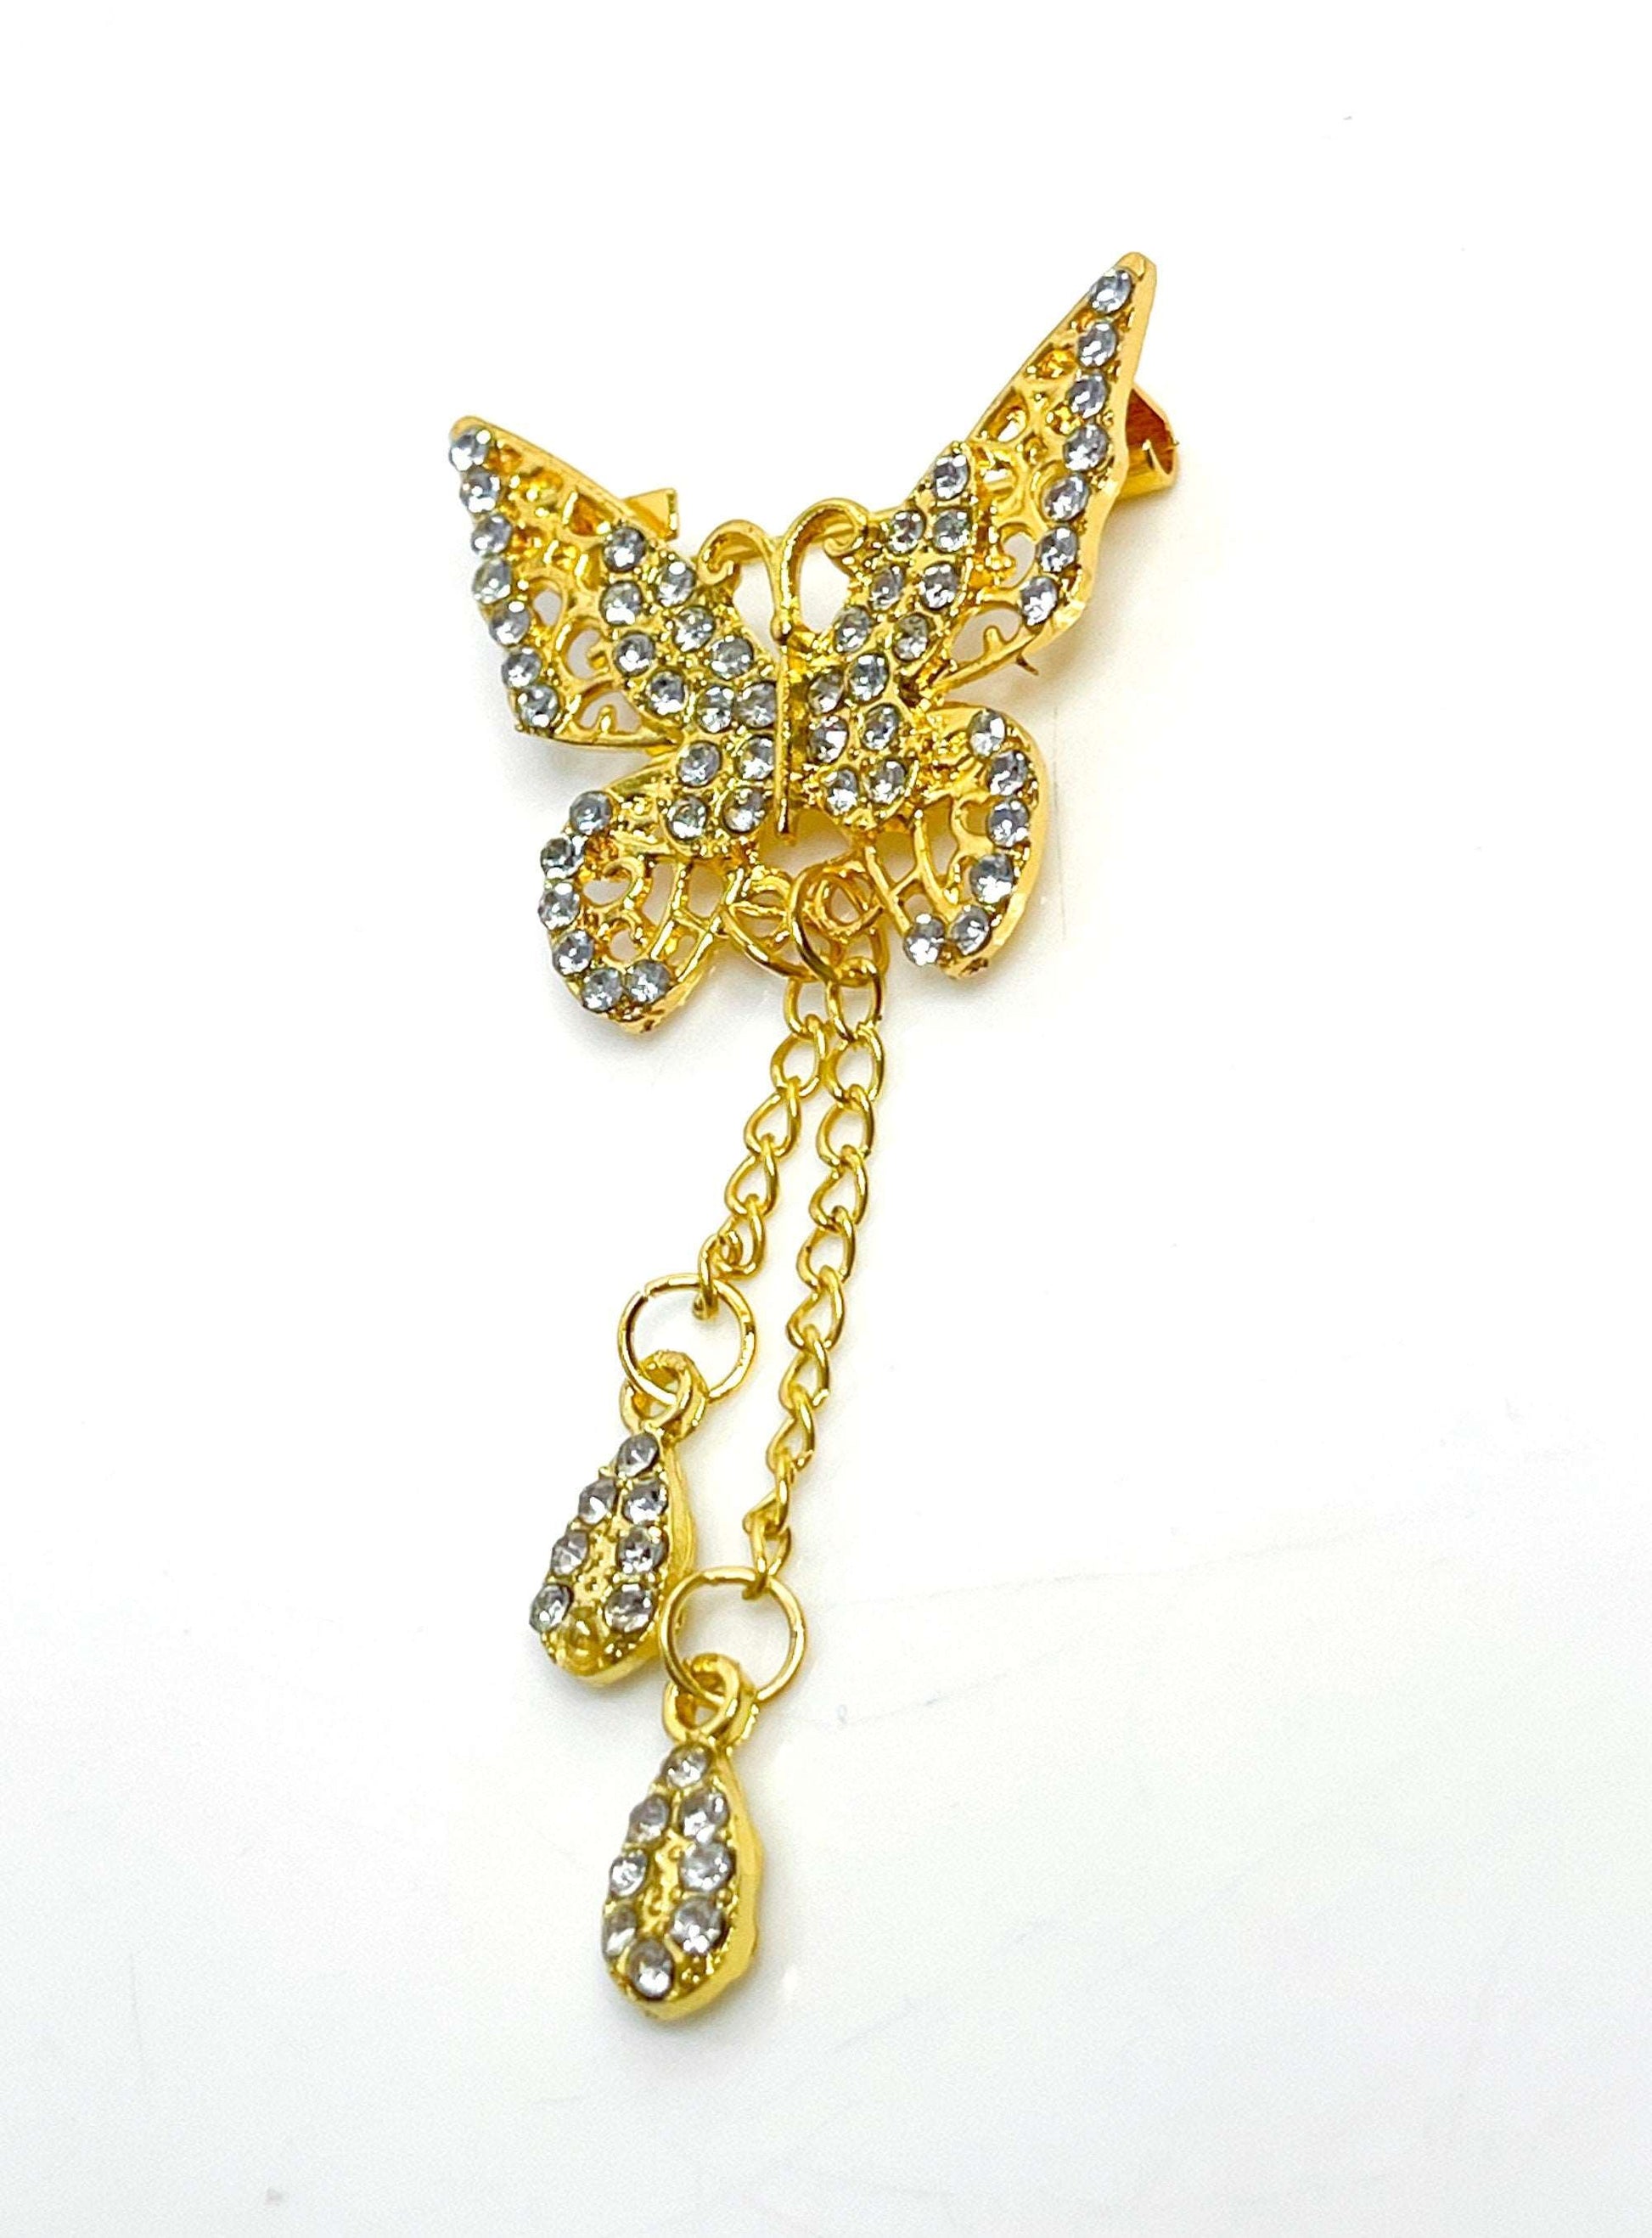 Gold Butterfly Tassel Brooch, Butterfly with Tassels, Crystal Gold Jacket Pin, Butterfly Lovers Pin, Brooches For Women